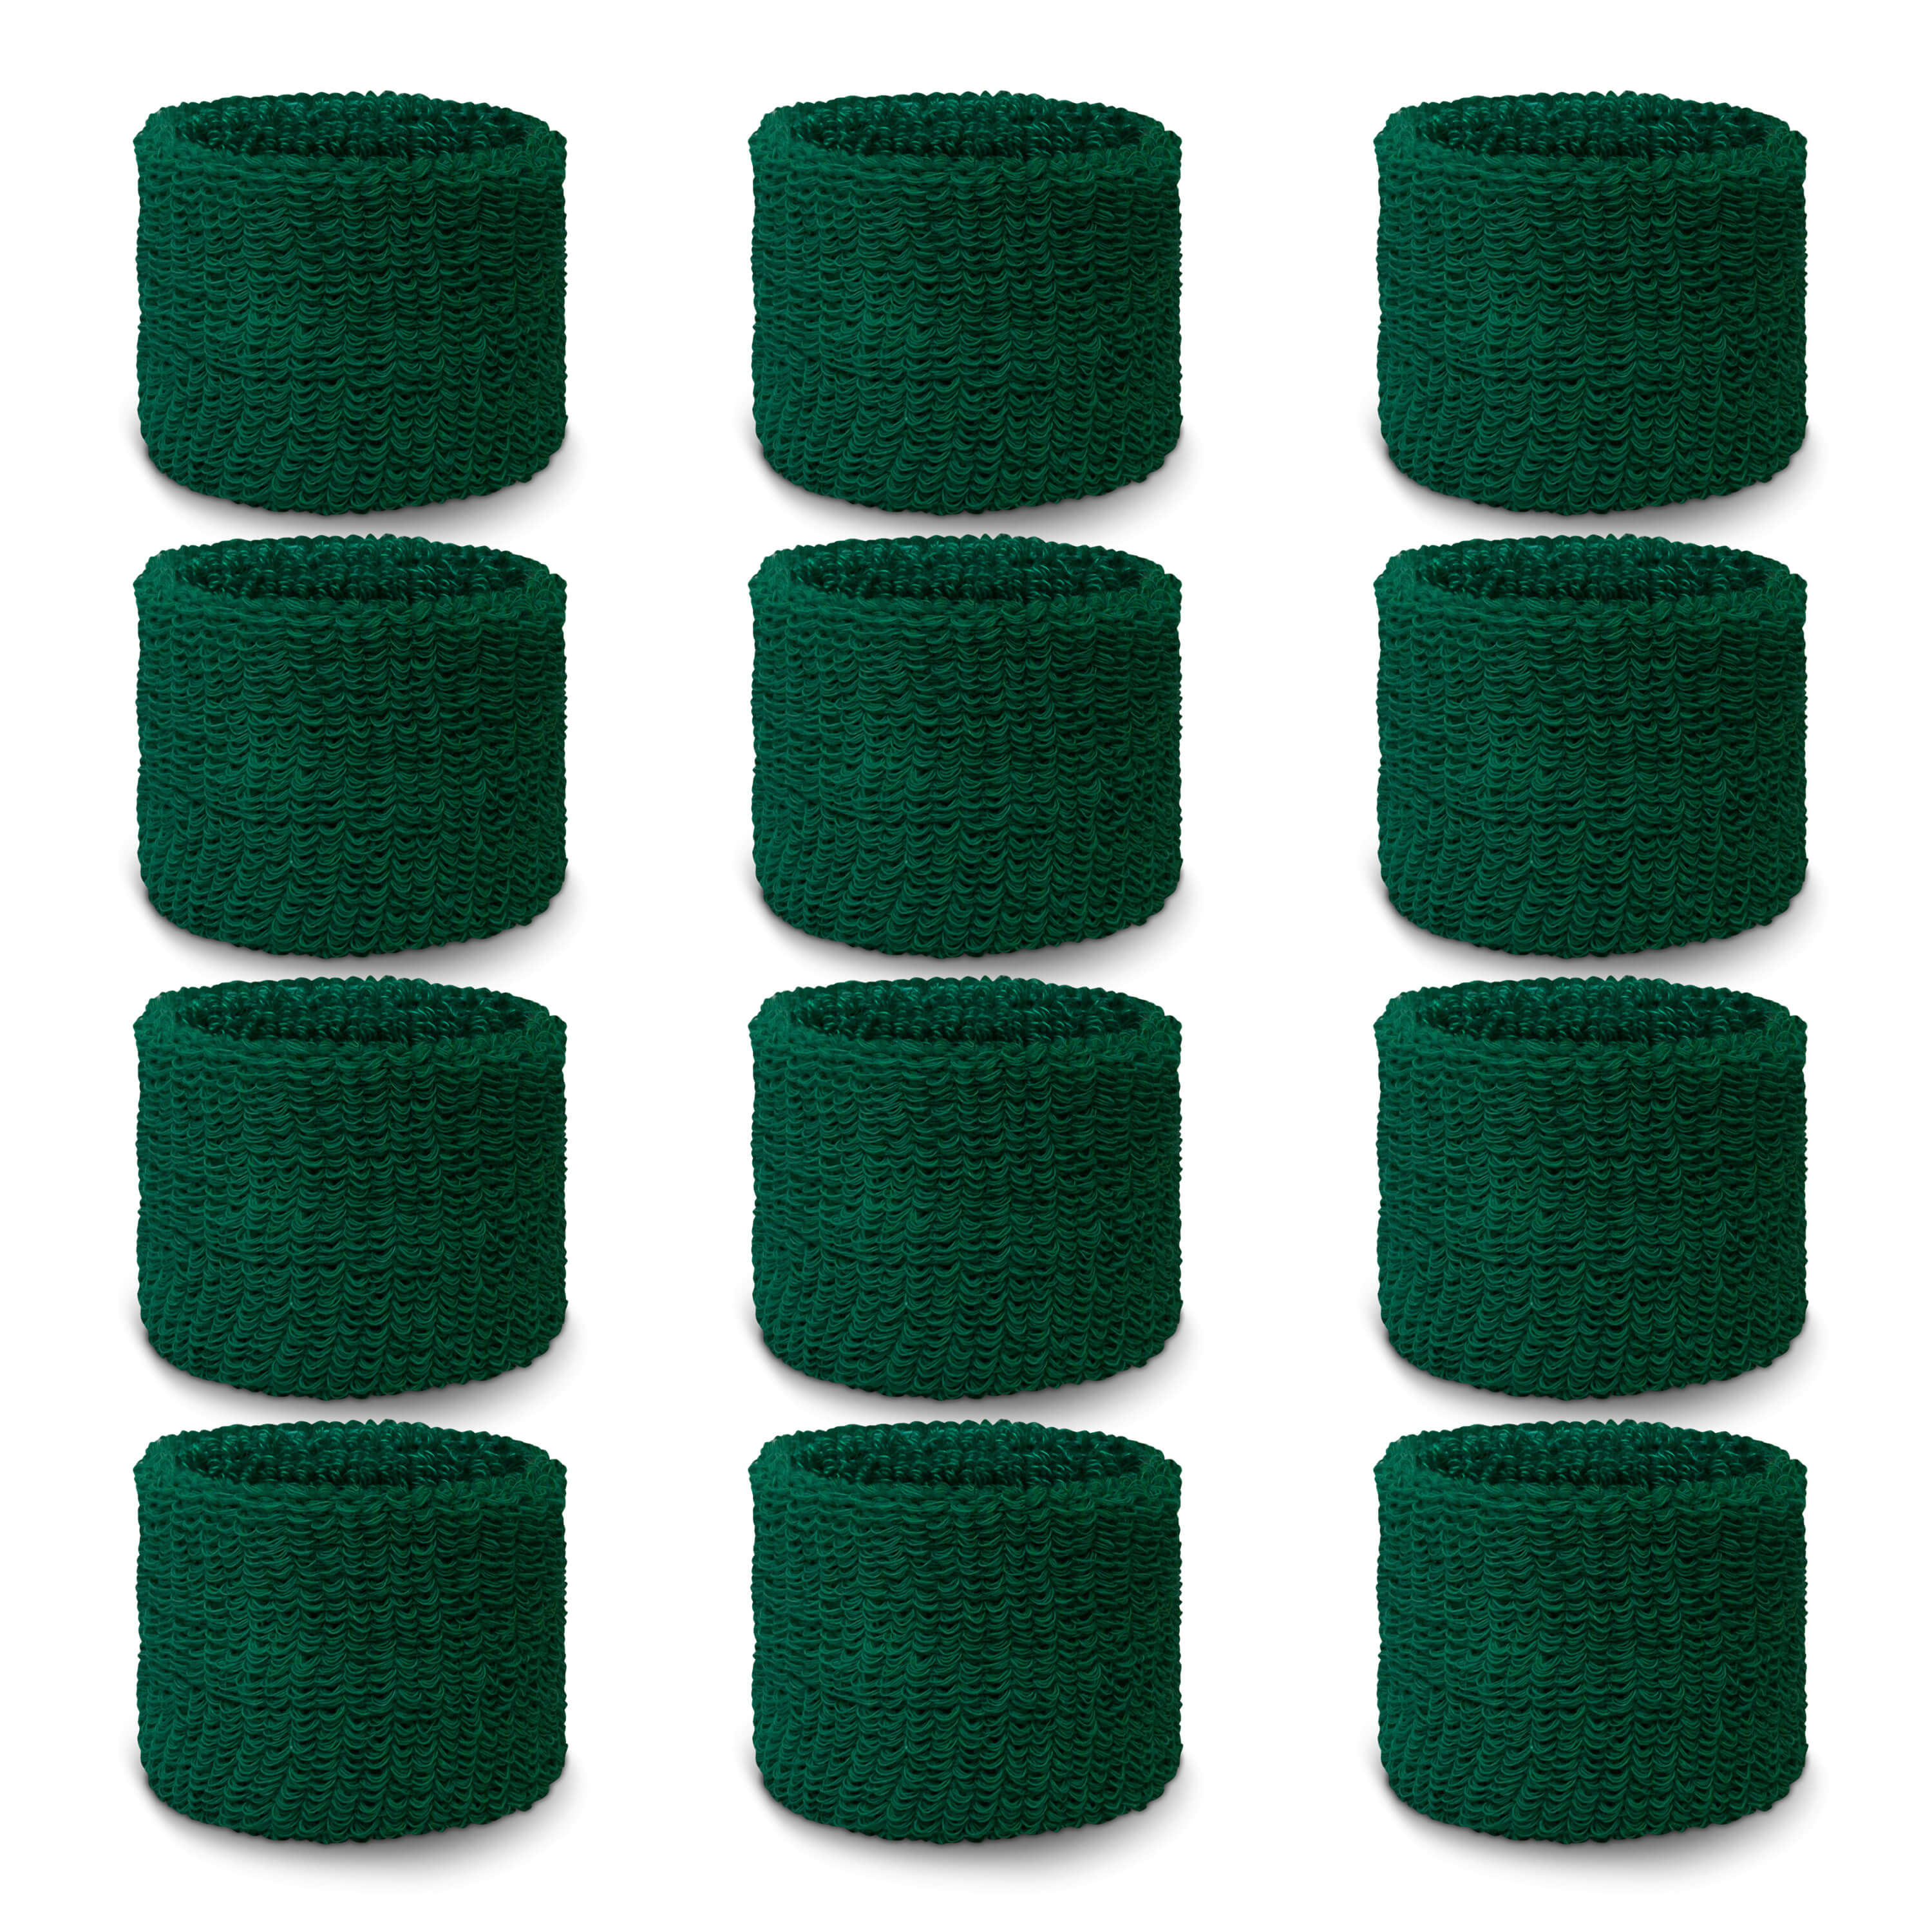 Dark green youth terry wristbands wholesale for schools [6pairs]